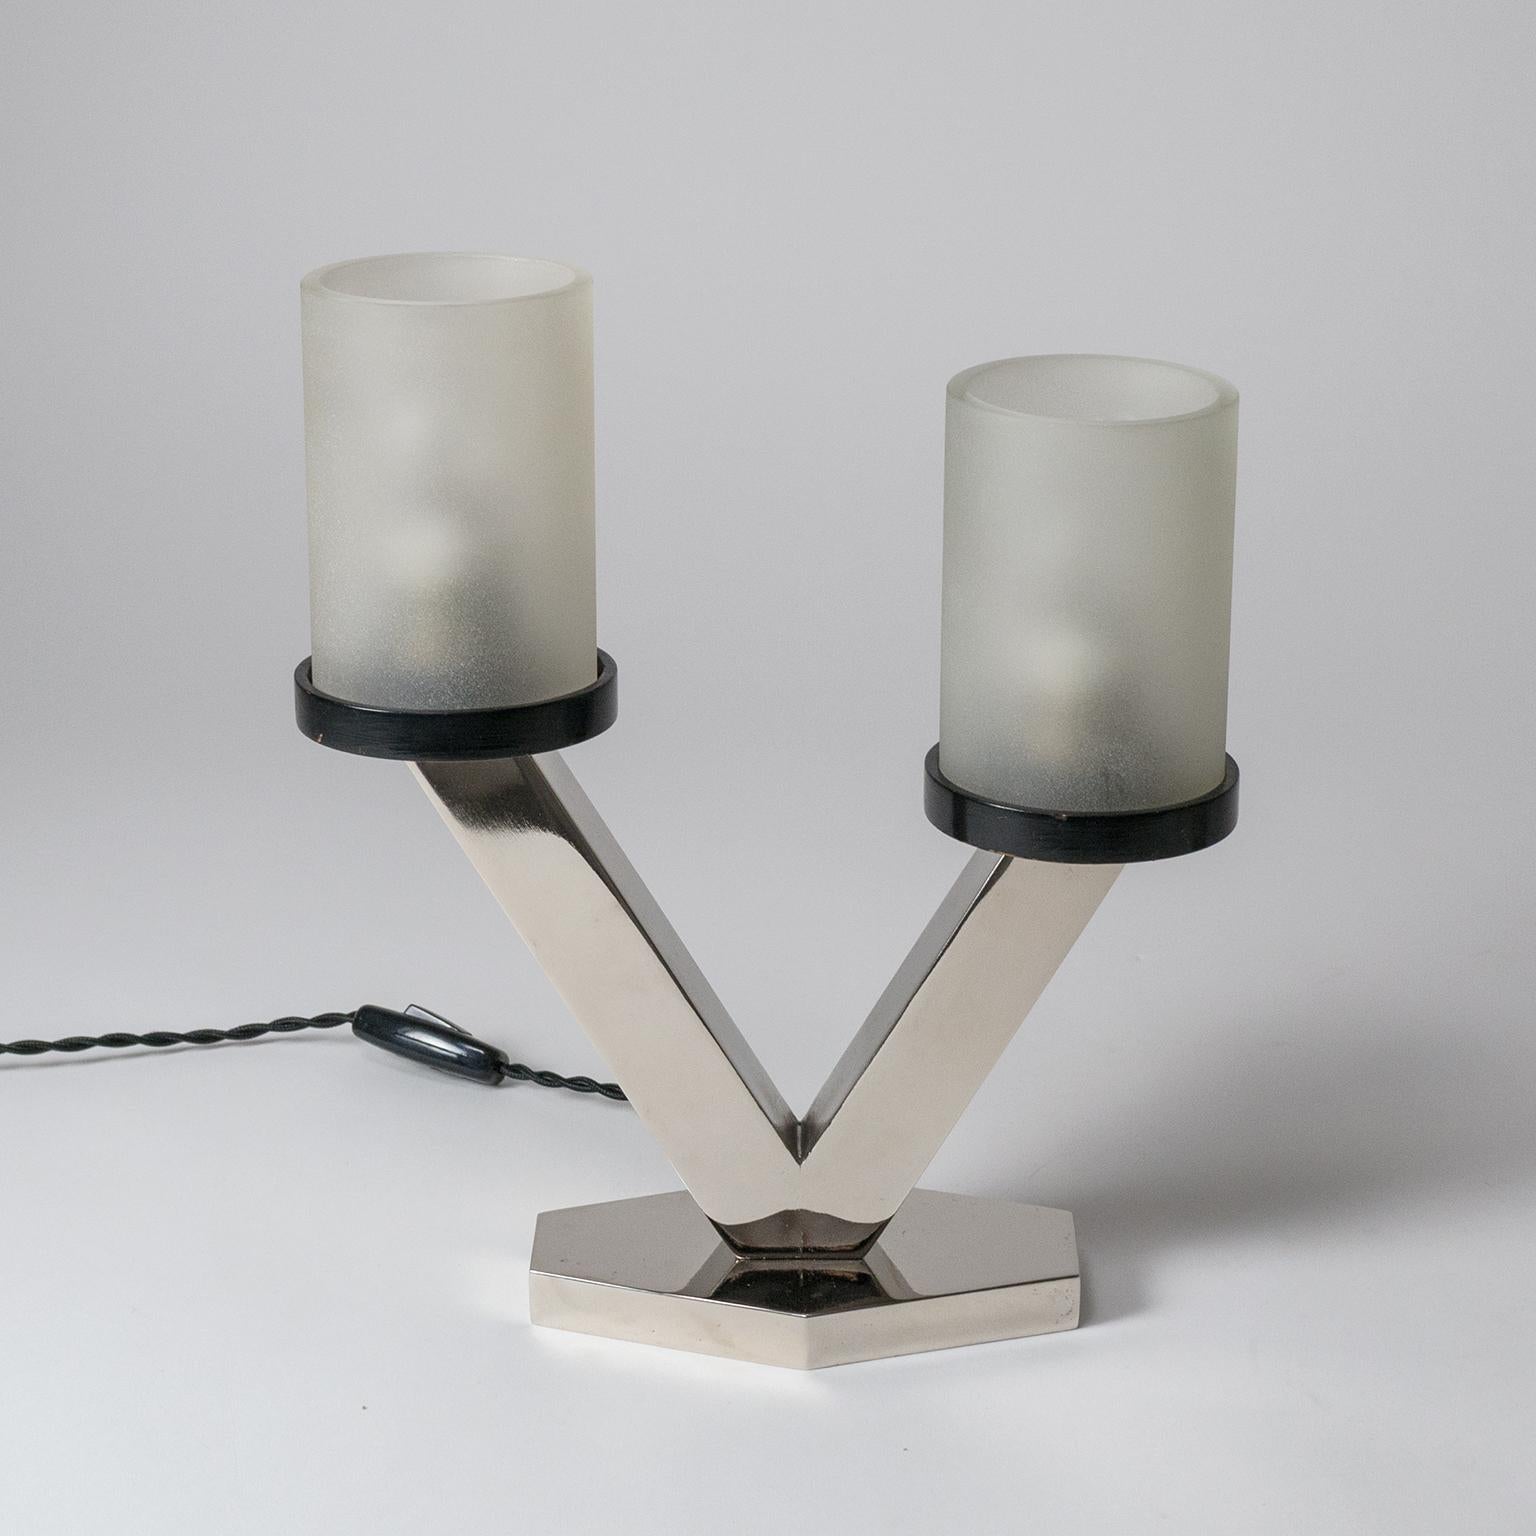 1920s Art Deco Table Lamps, Nickel and Glass 4